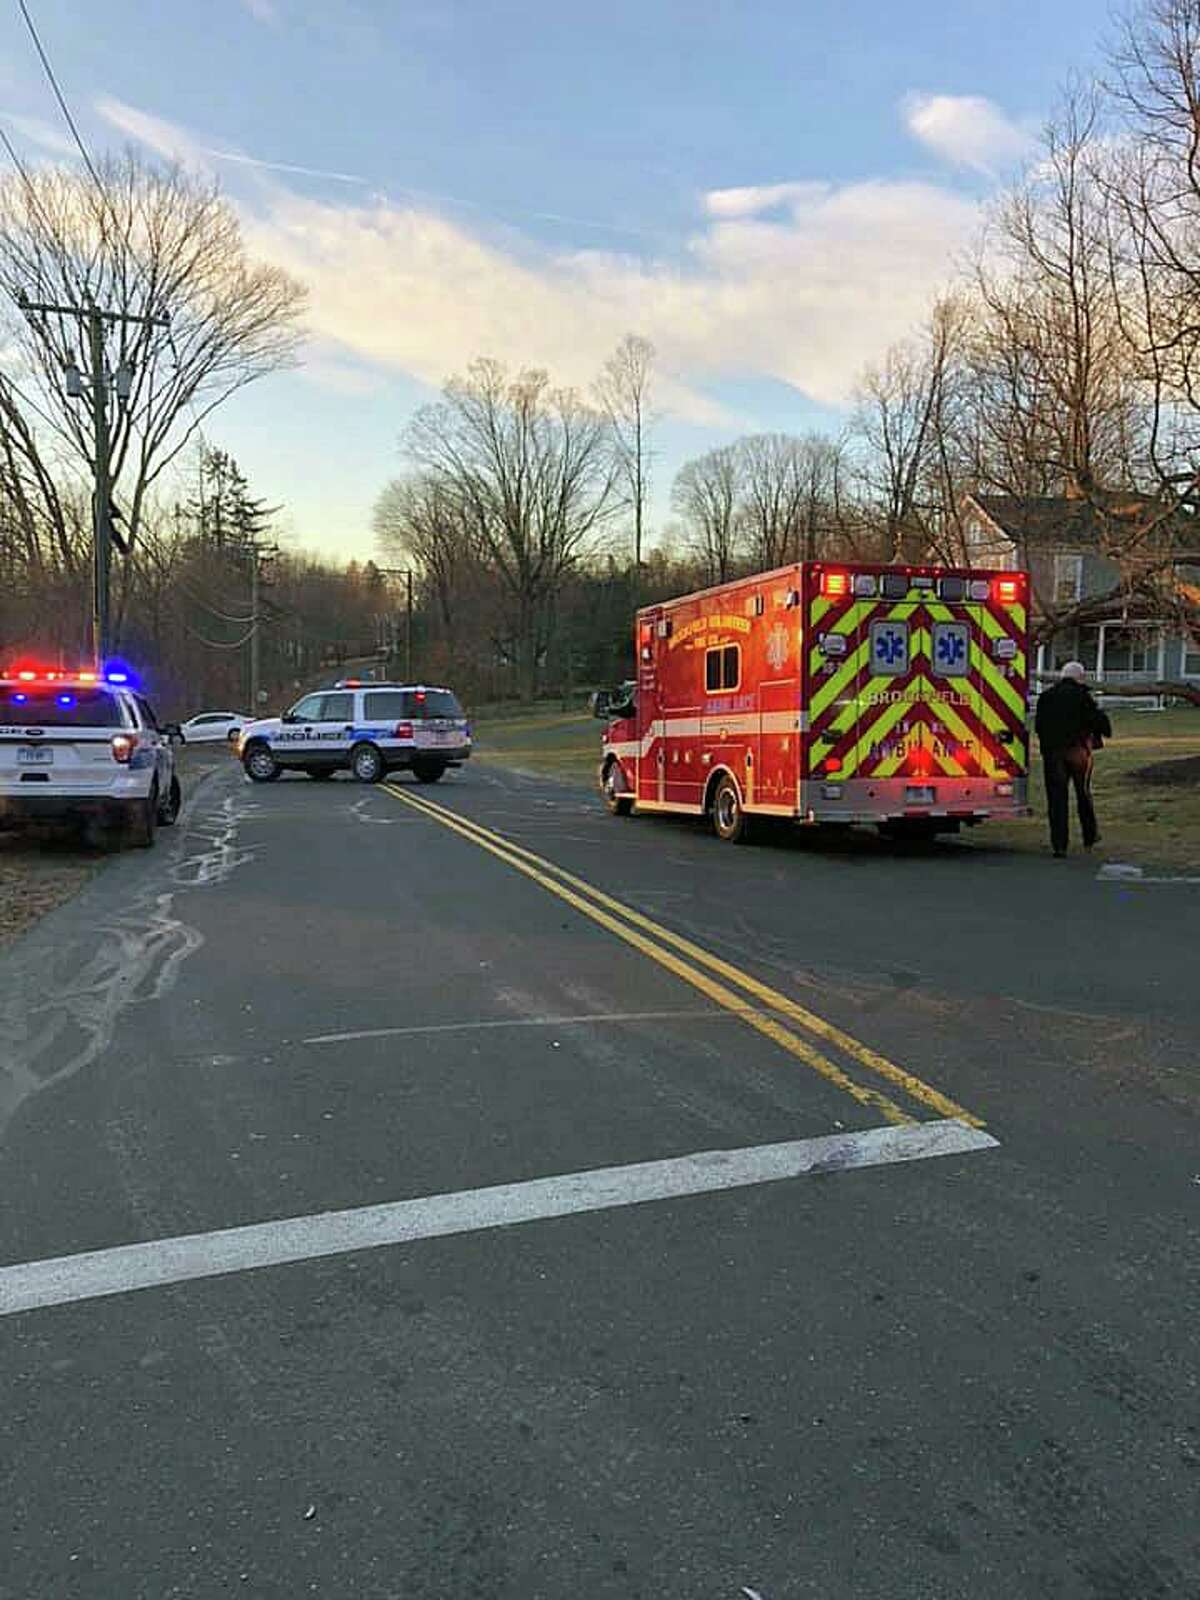 Around 7:10 a.m. on Jan. 16, 2019, the Brookfield Volunteer Fire Company was sent to the intersection of Obtuse Road South and Route 133 in Brookfield, Conn., for a two-car crash with injuries.